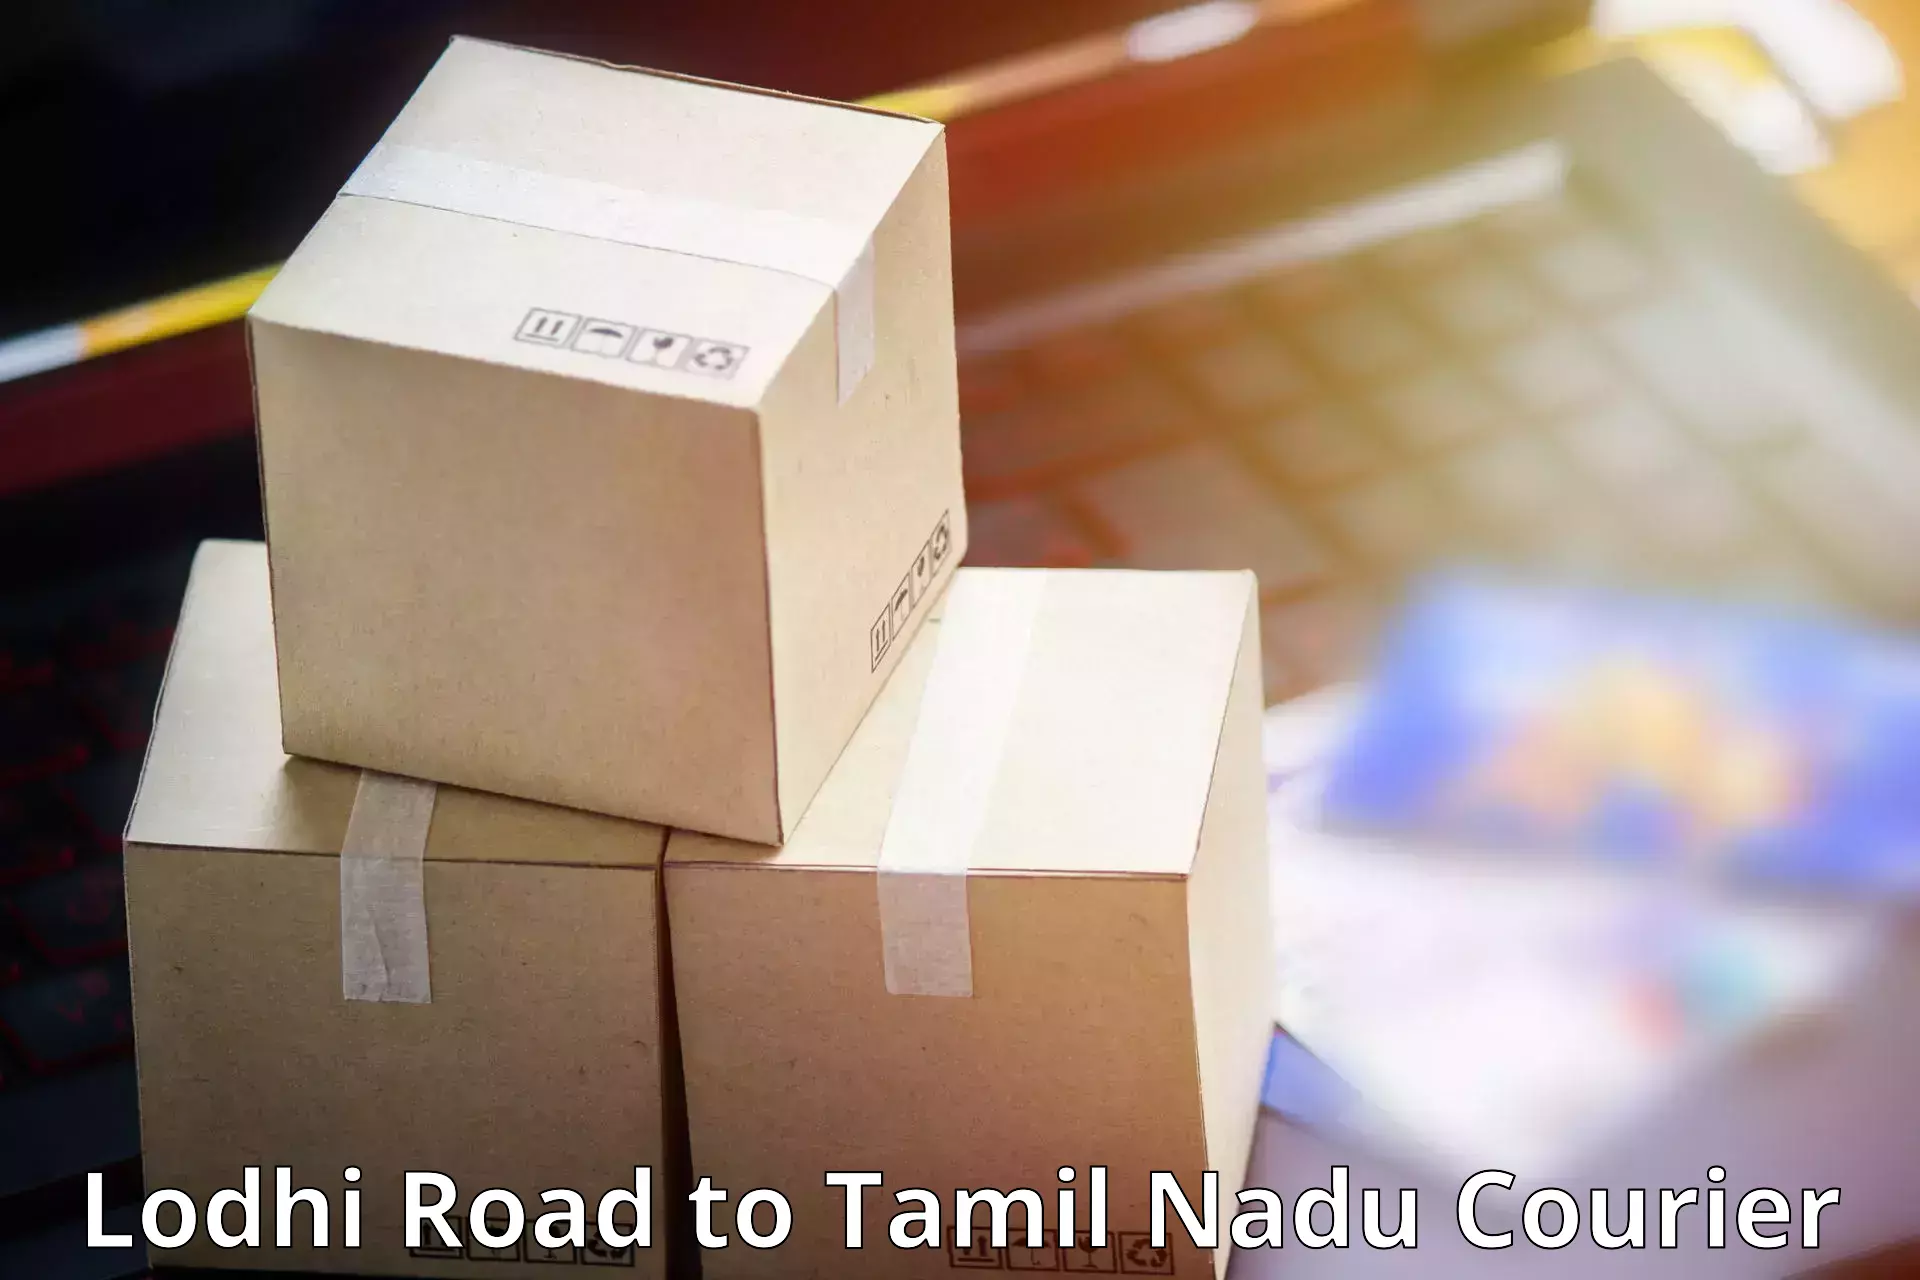 Weekend courier service in Lodhi Road to Tamil Nadu